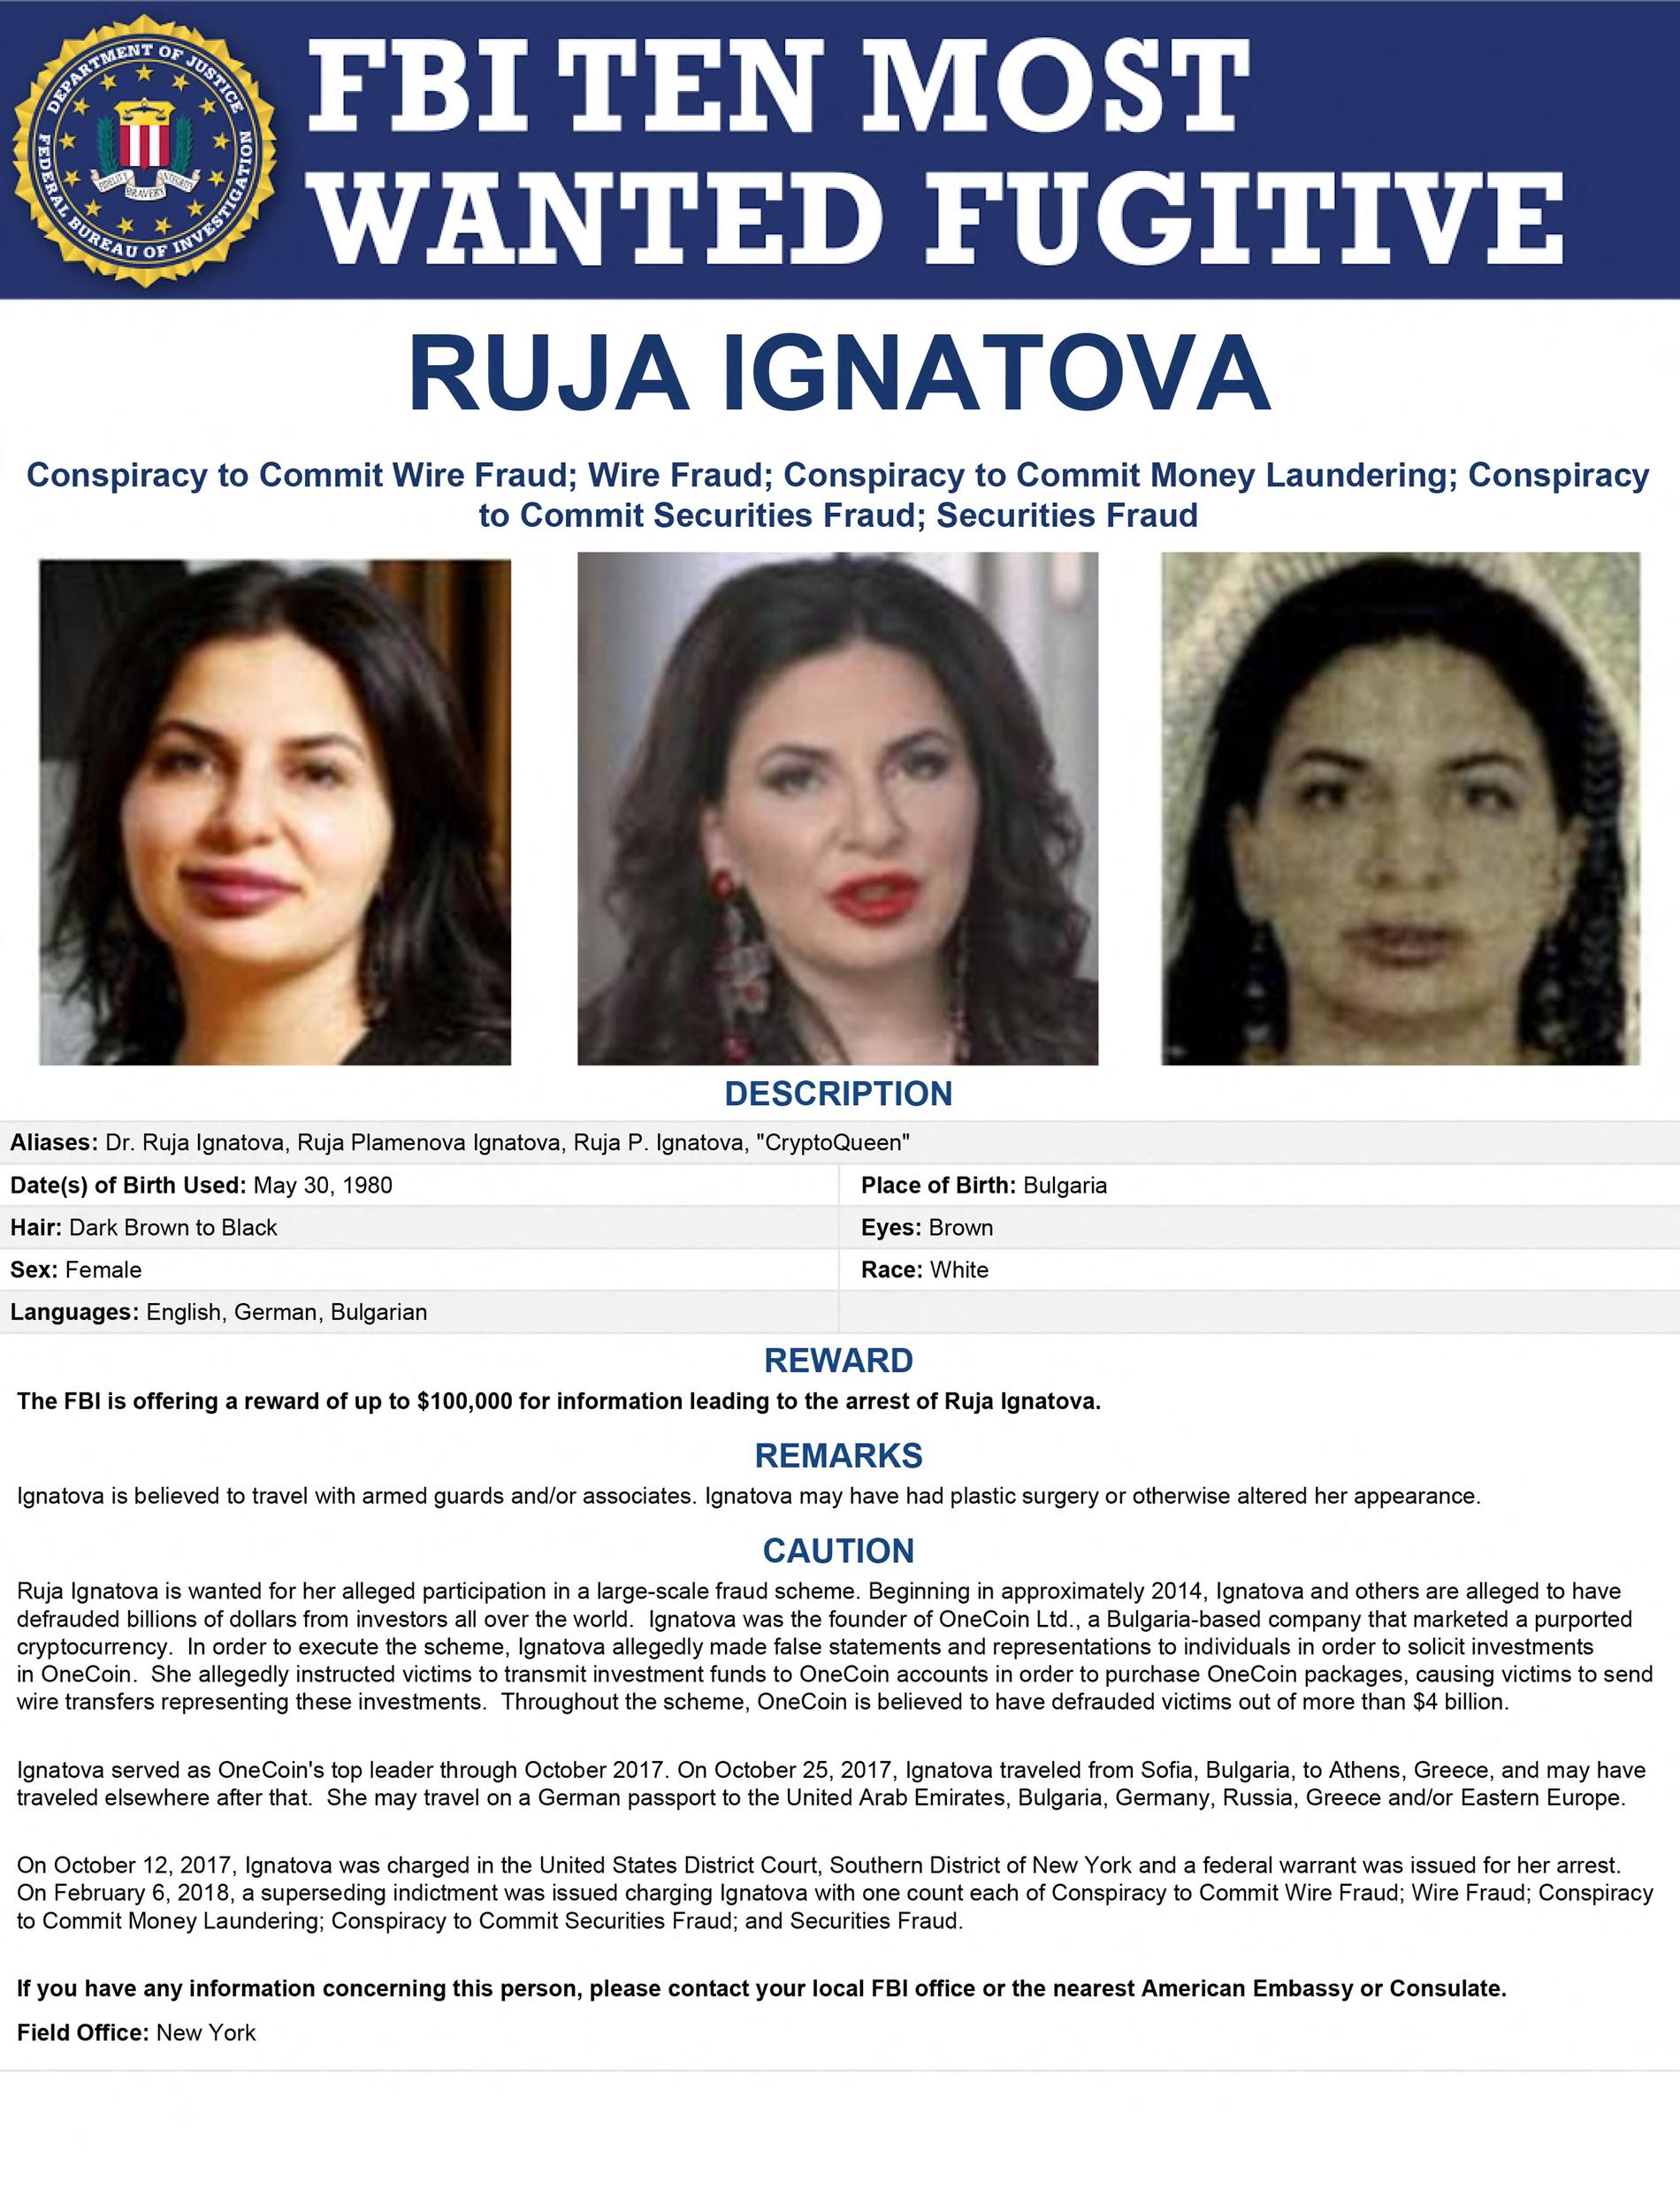 Wanted: Ruja Ignatova is on the FBI's list of the ten most wanted people. 